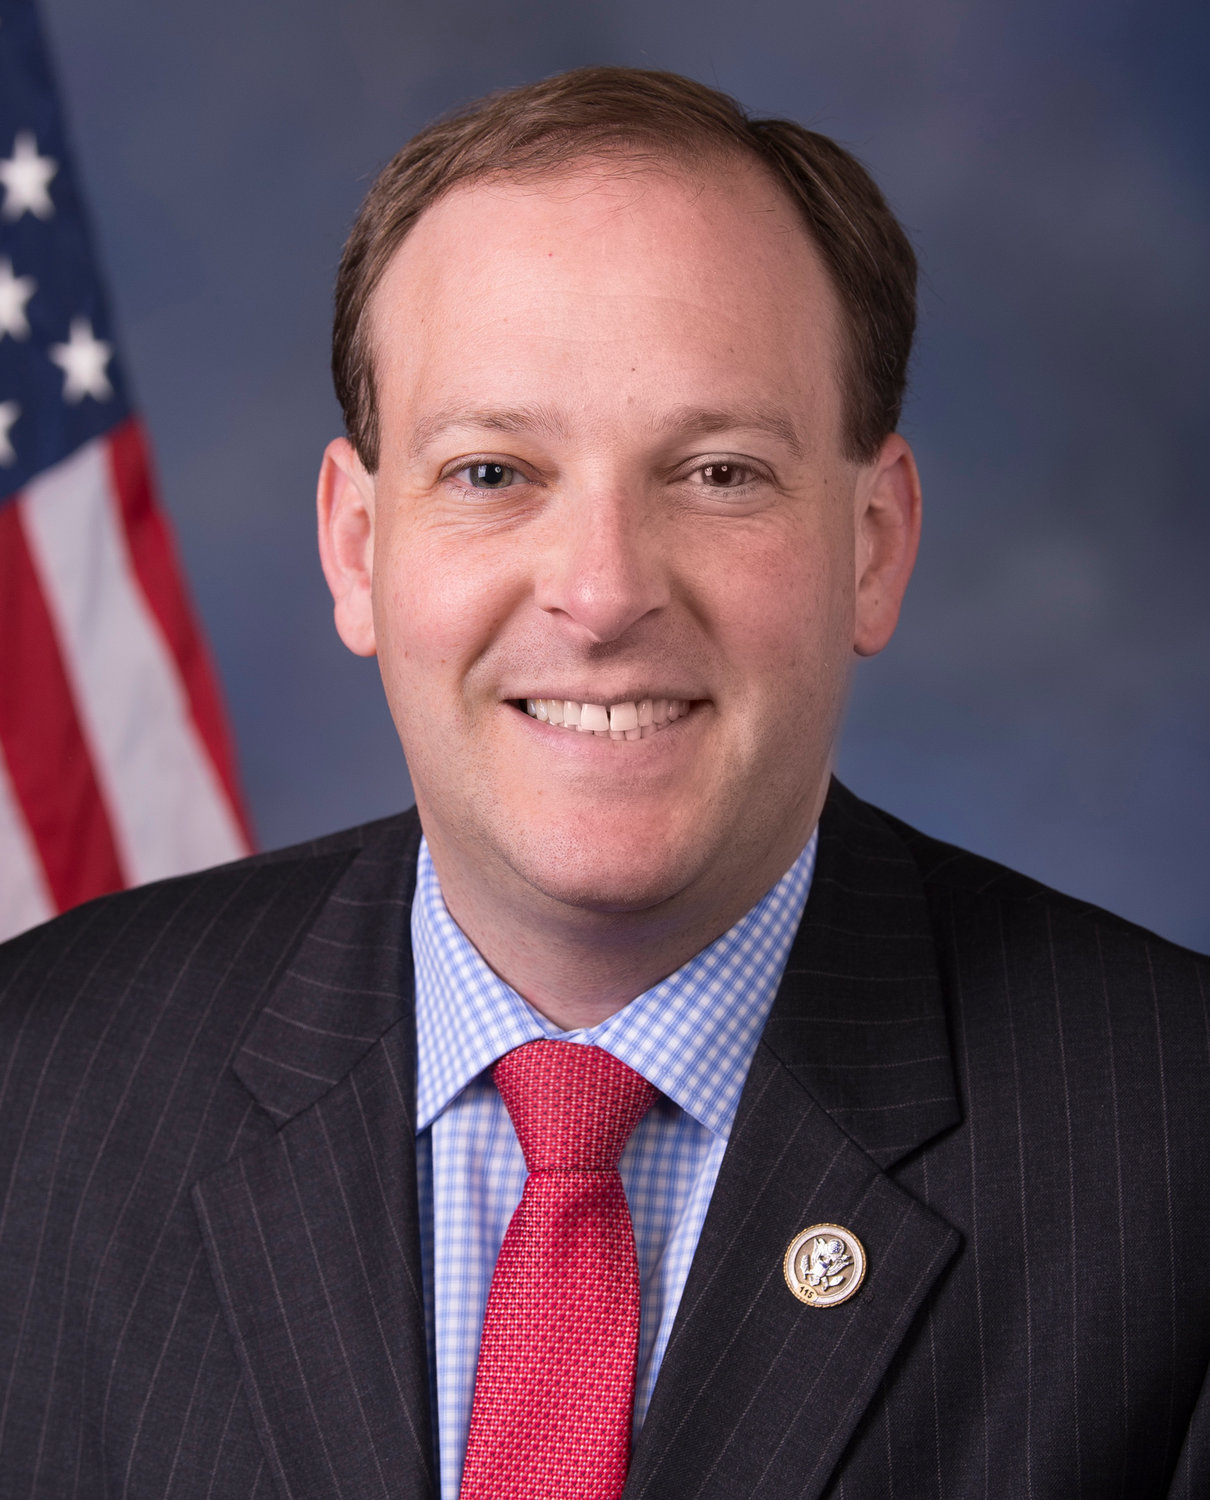 Congressman Lee Zeldin (R, NY-1) announced he will run for Governor of New York in 2022.